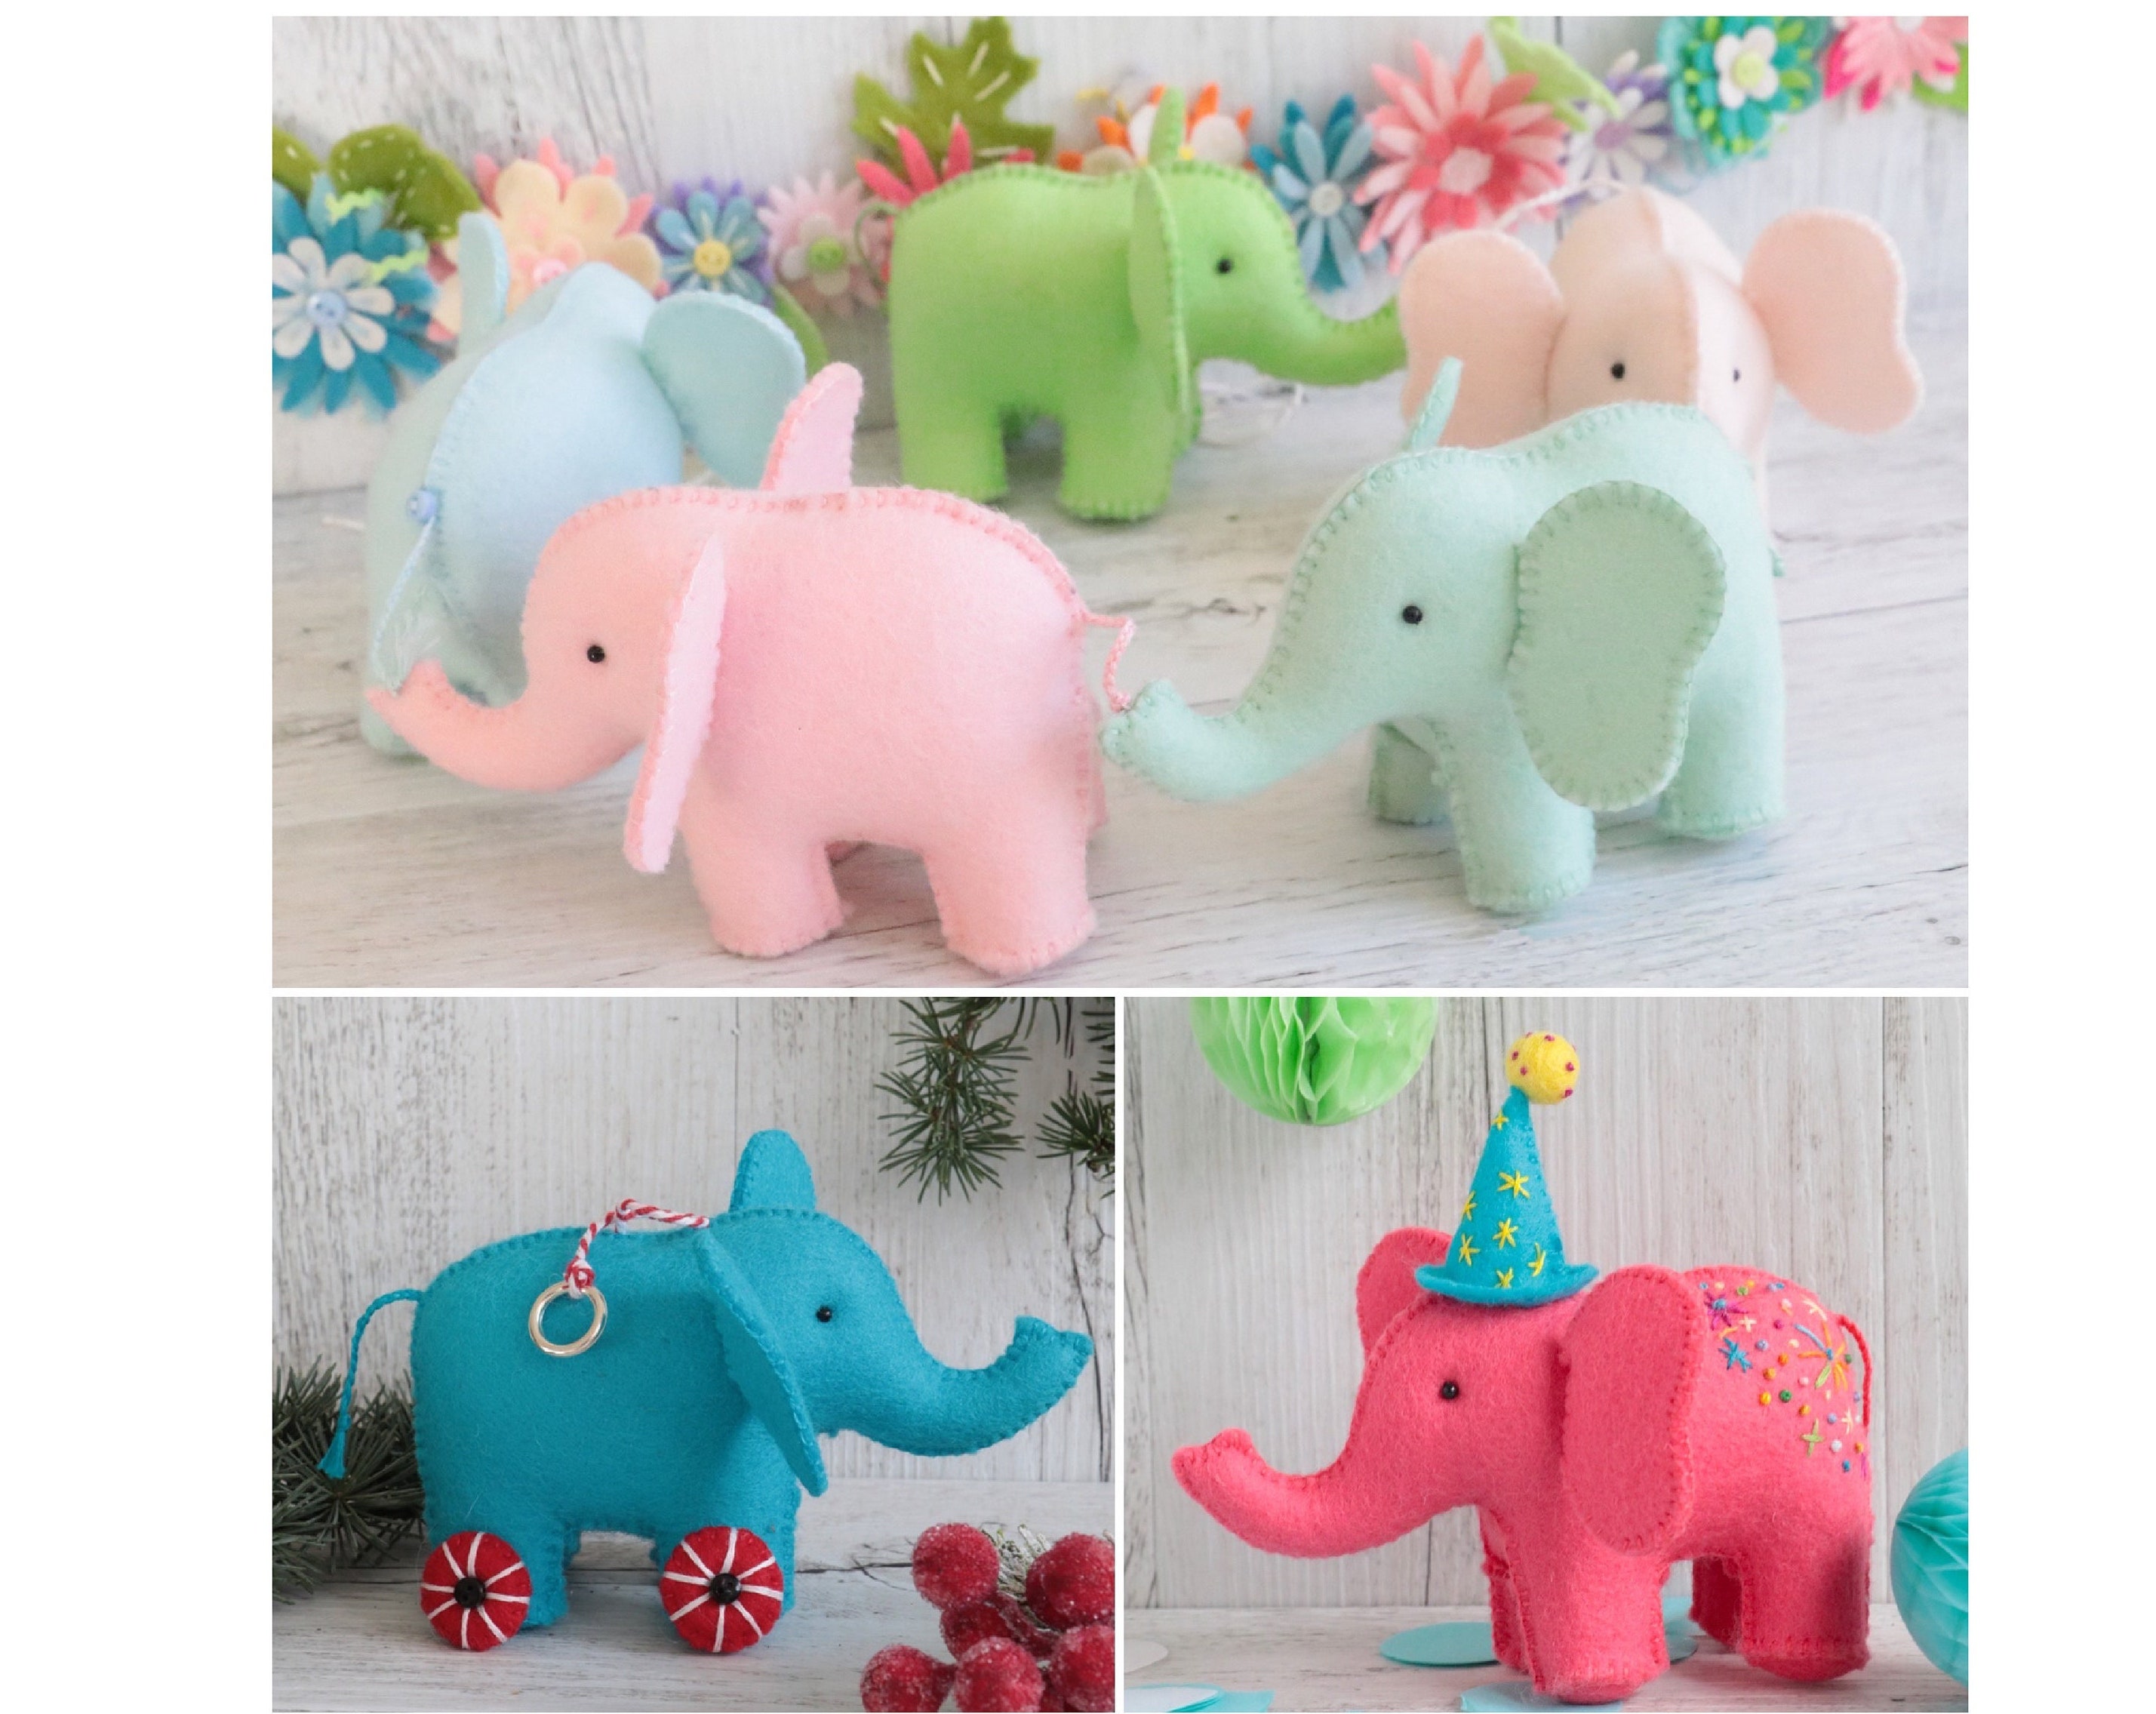  Lovely Elephant Decor Template with Instructions